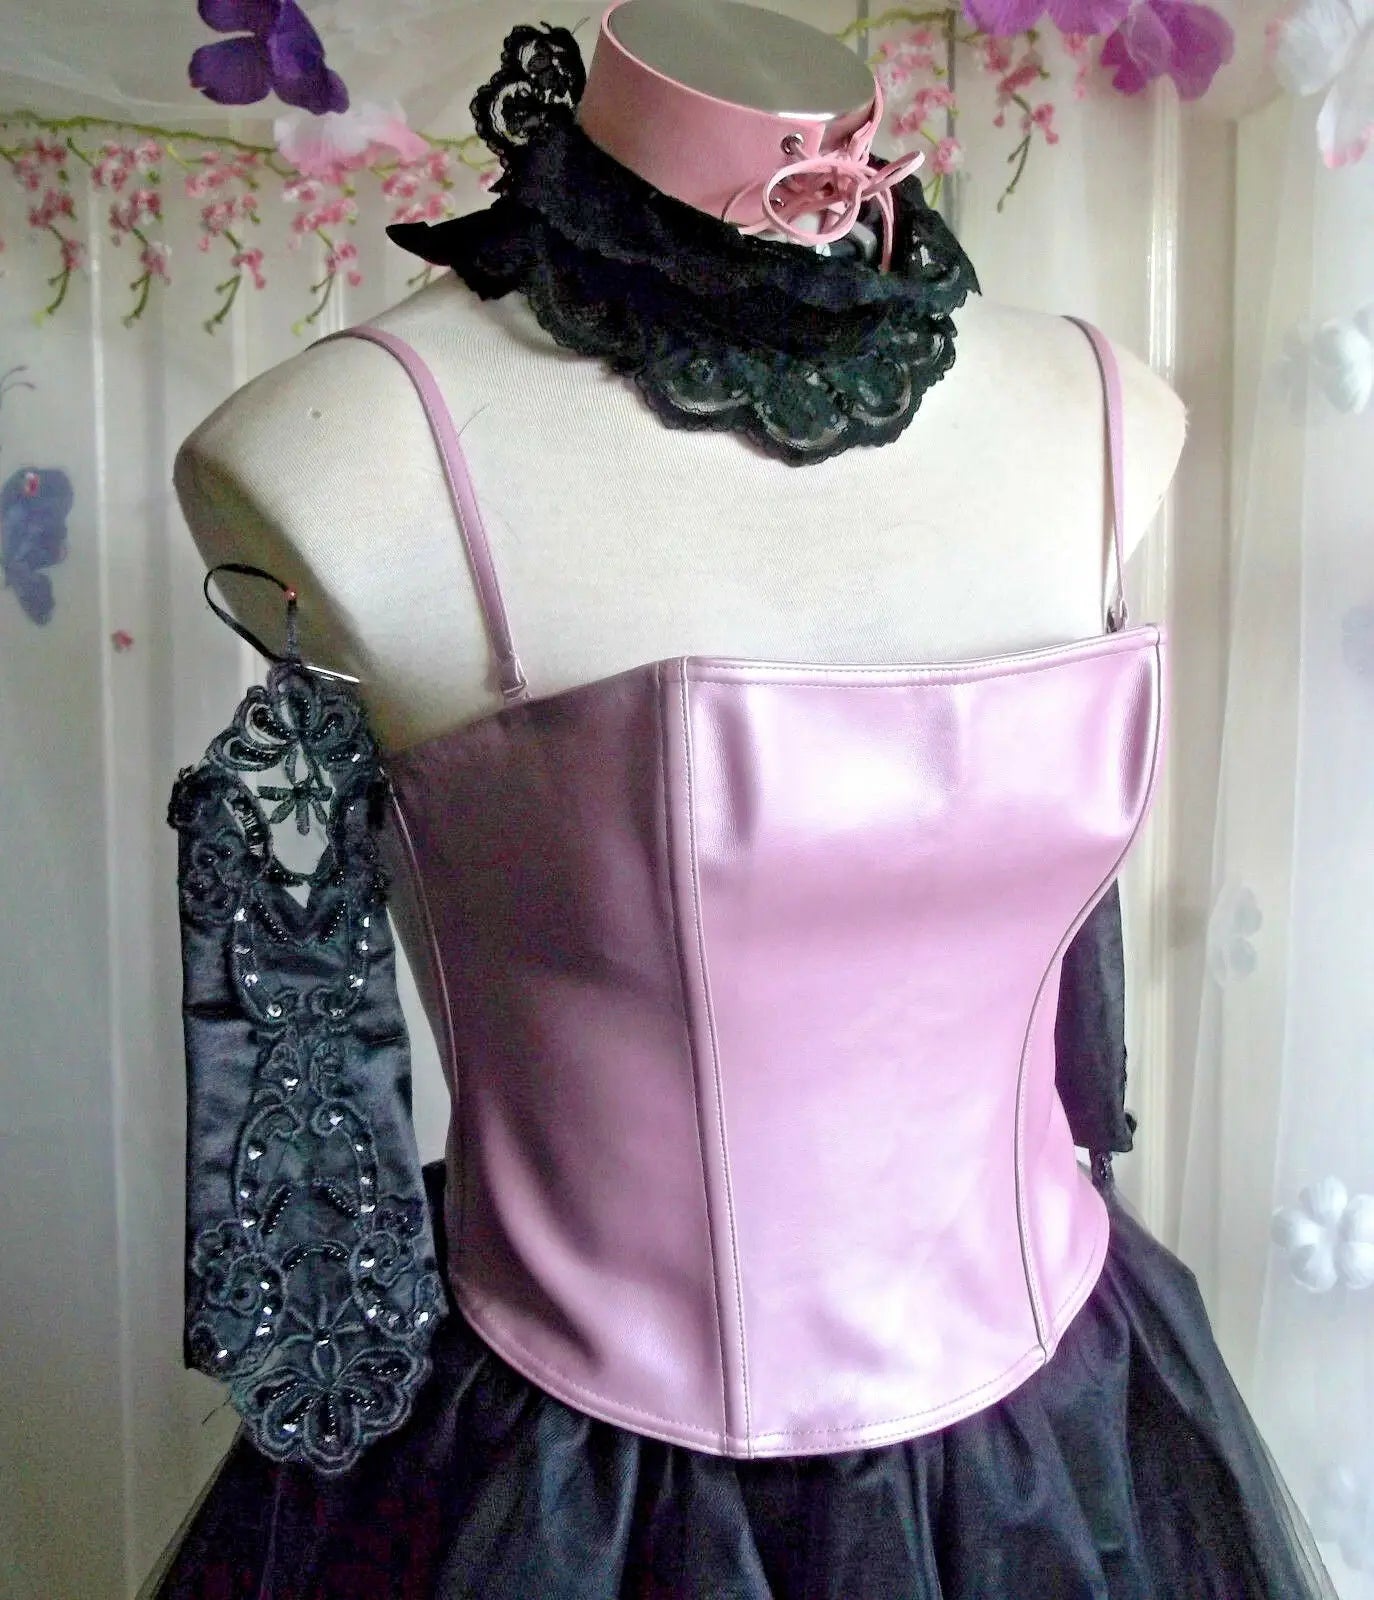 gorgeous ann summers pink strappy/shiny corset size 10-12 Ann Summers